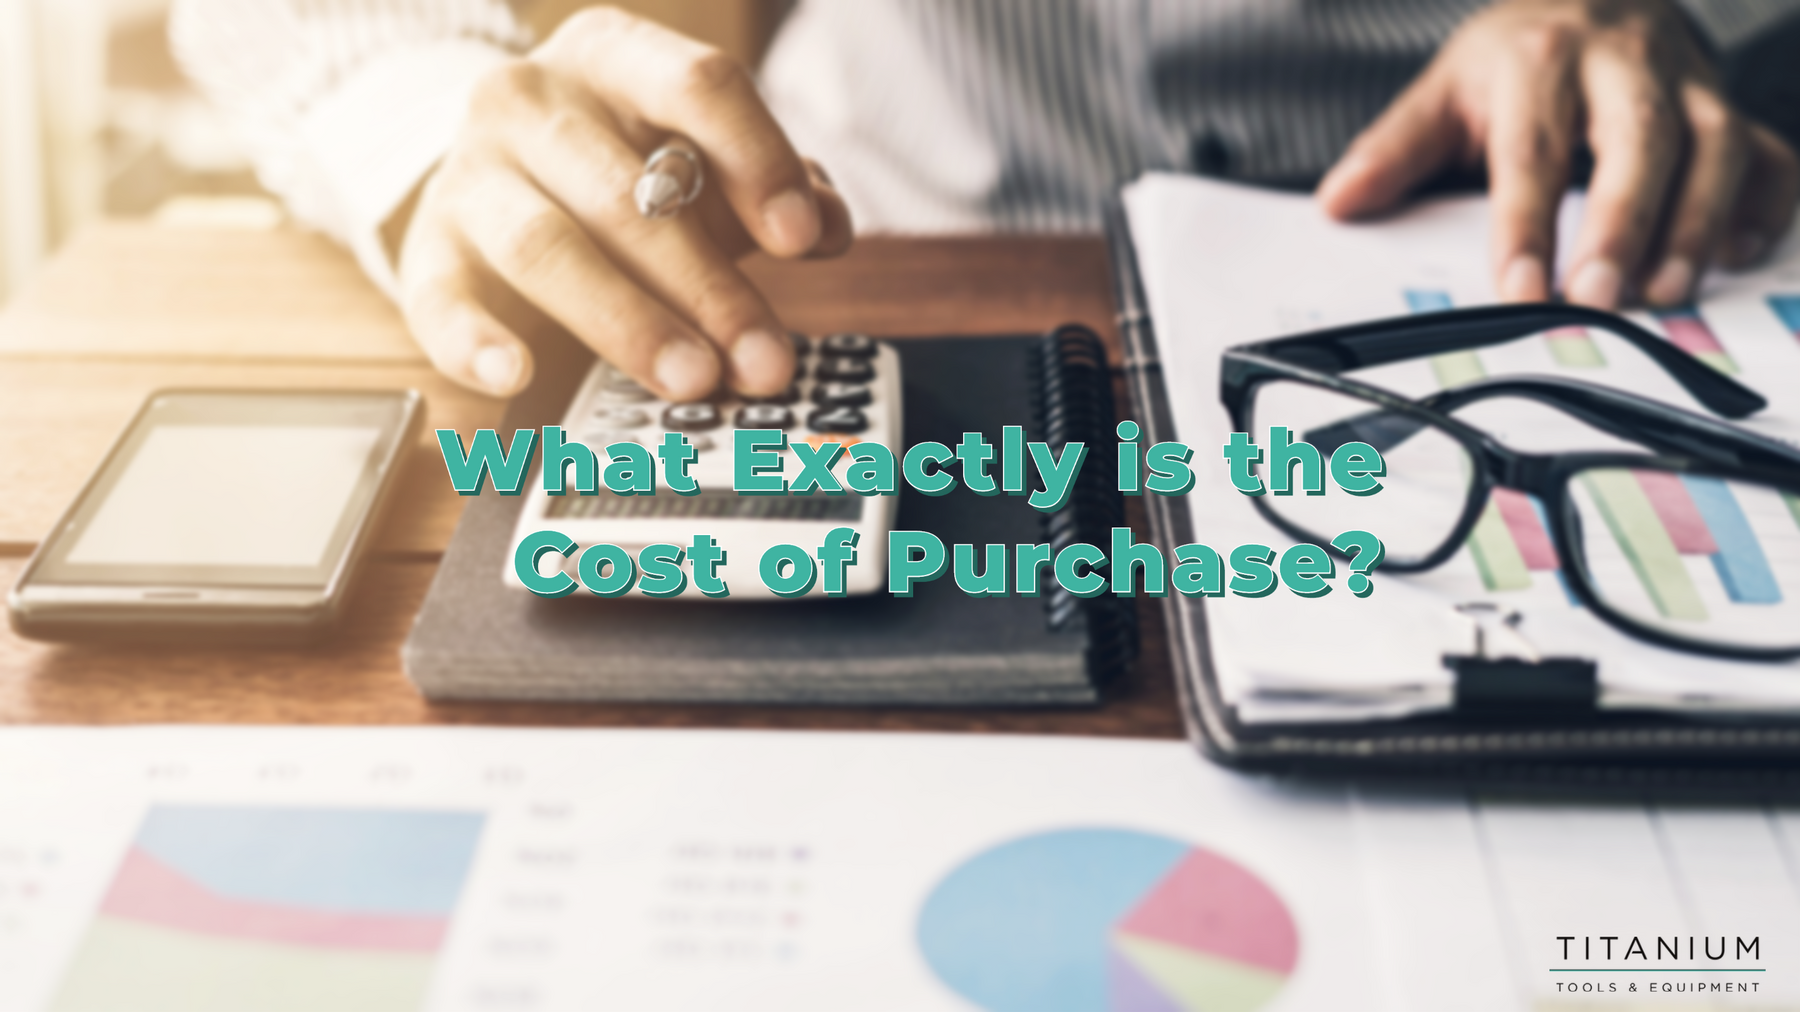 What Exactly is the Cost of Purchase?